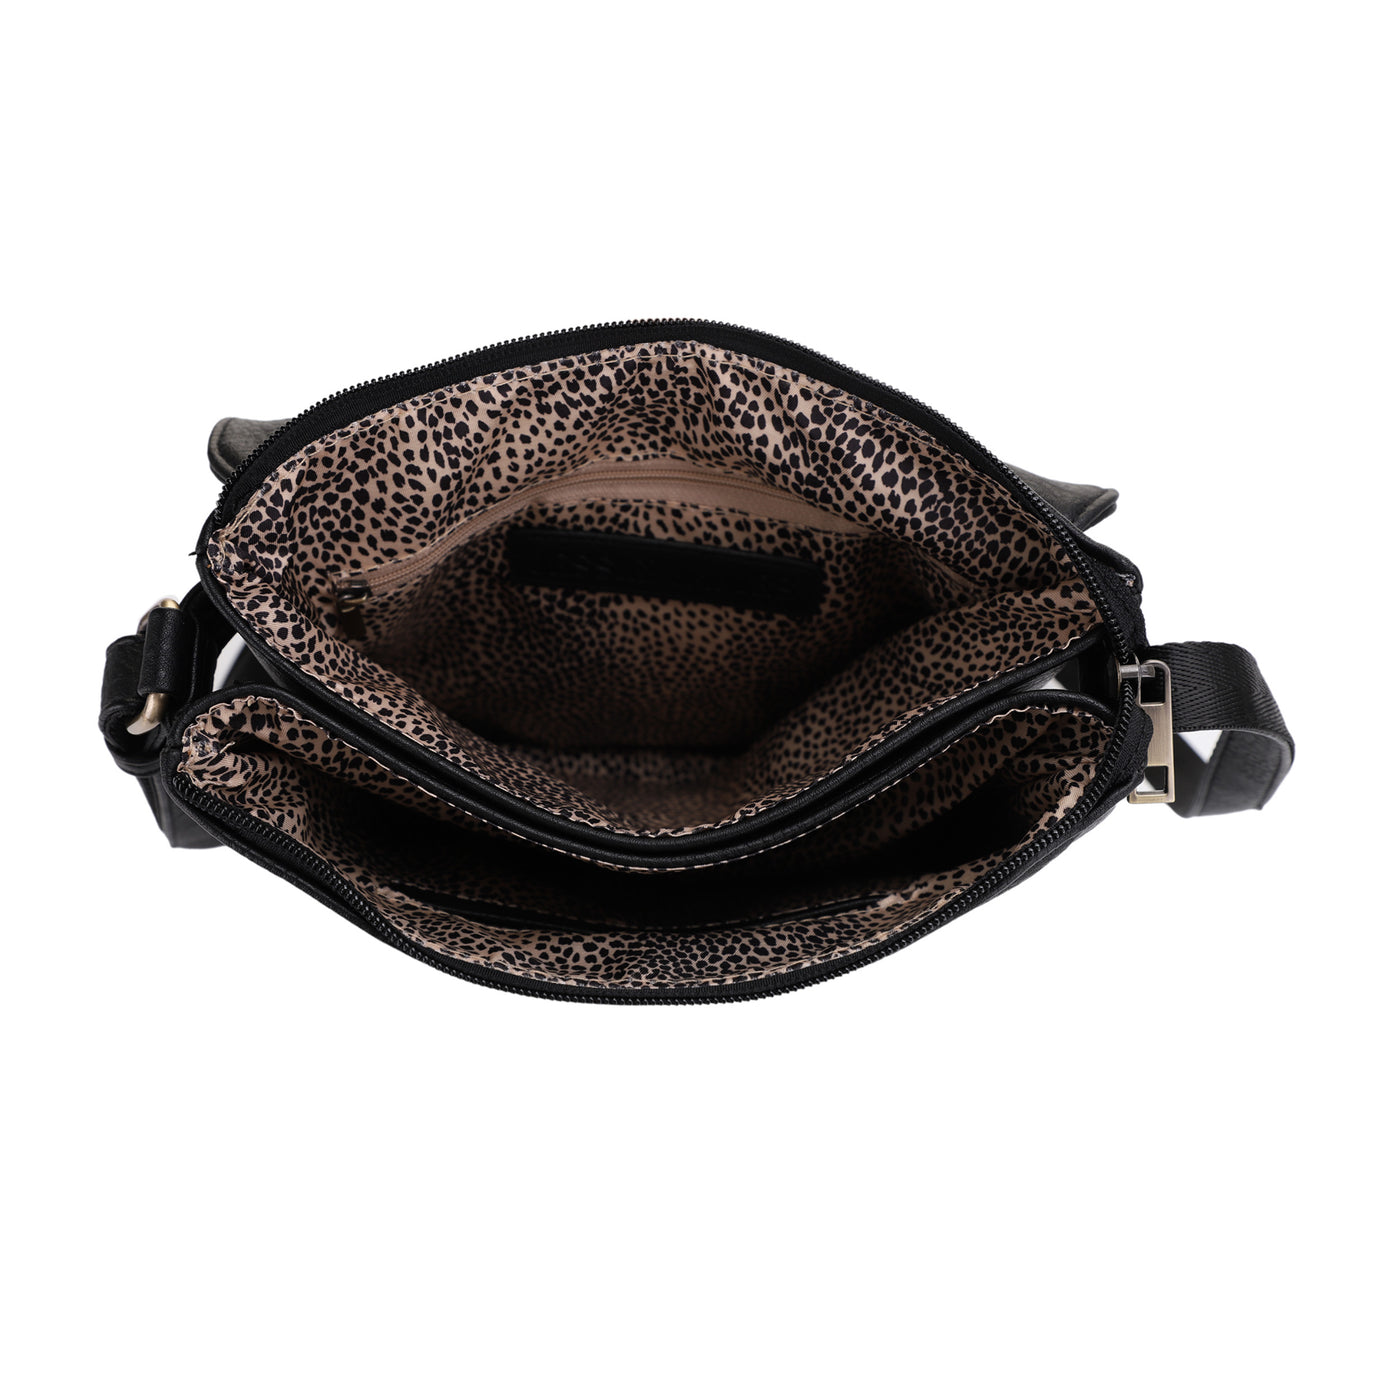 Nora Concealed Carry Lock and Key Crossbody